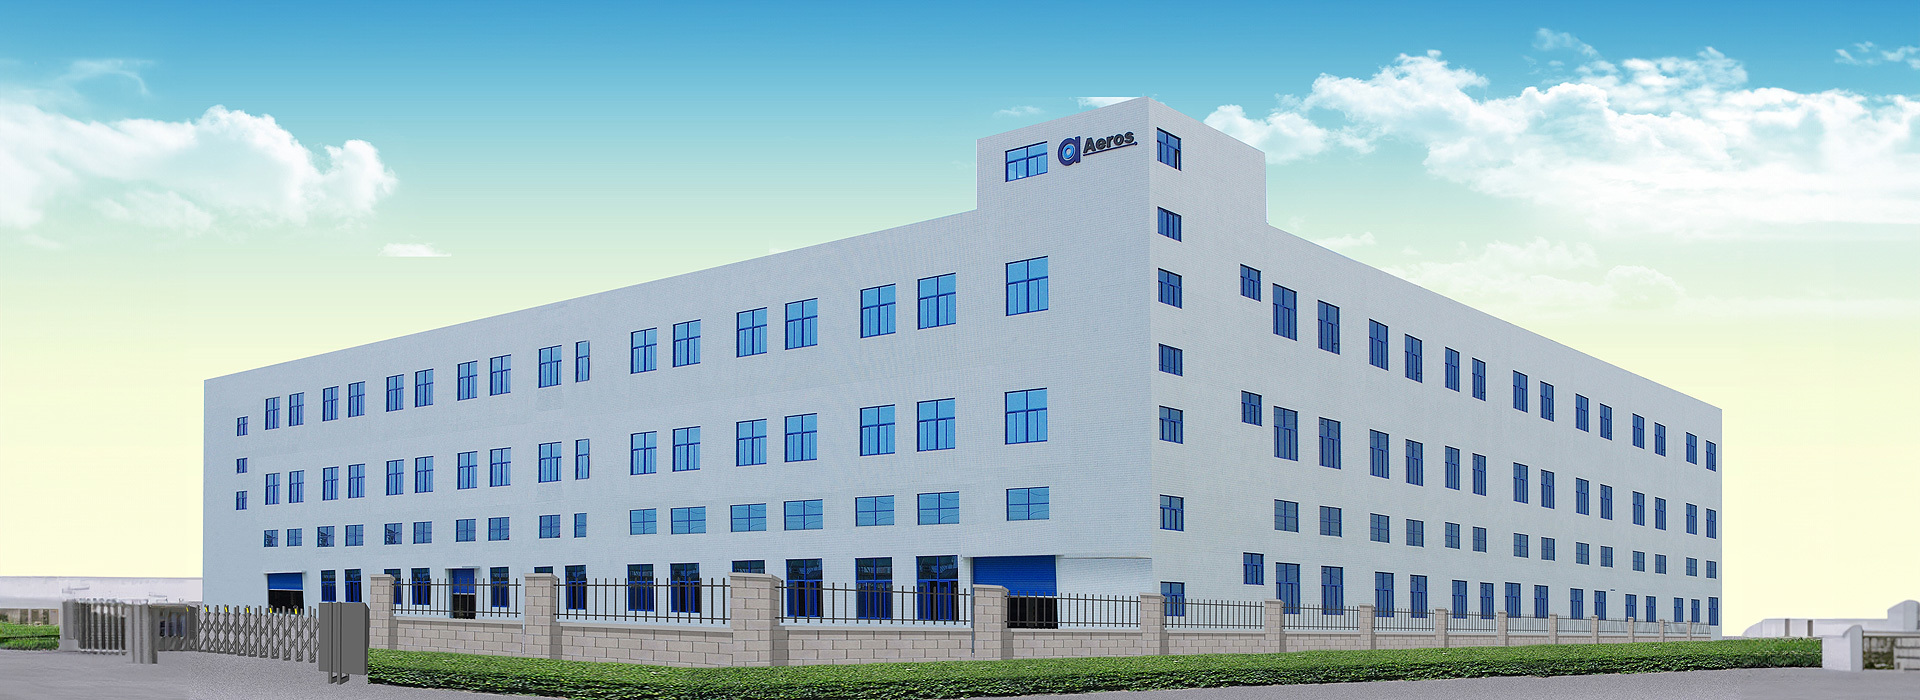 Yalus is incorporated in Guangdong, China: Foshan Yalus Industrial Equipment Co., Ltd.